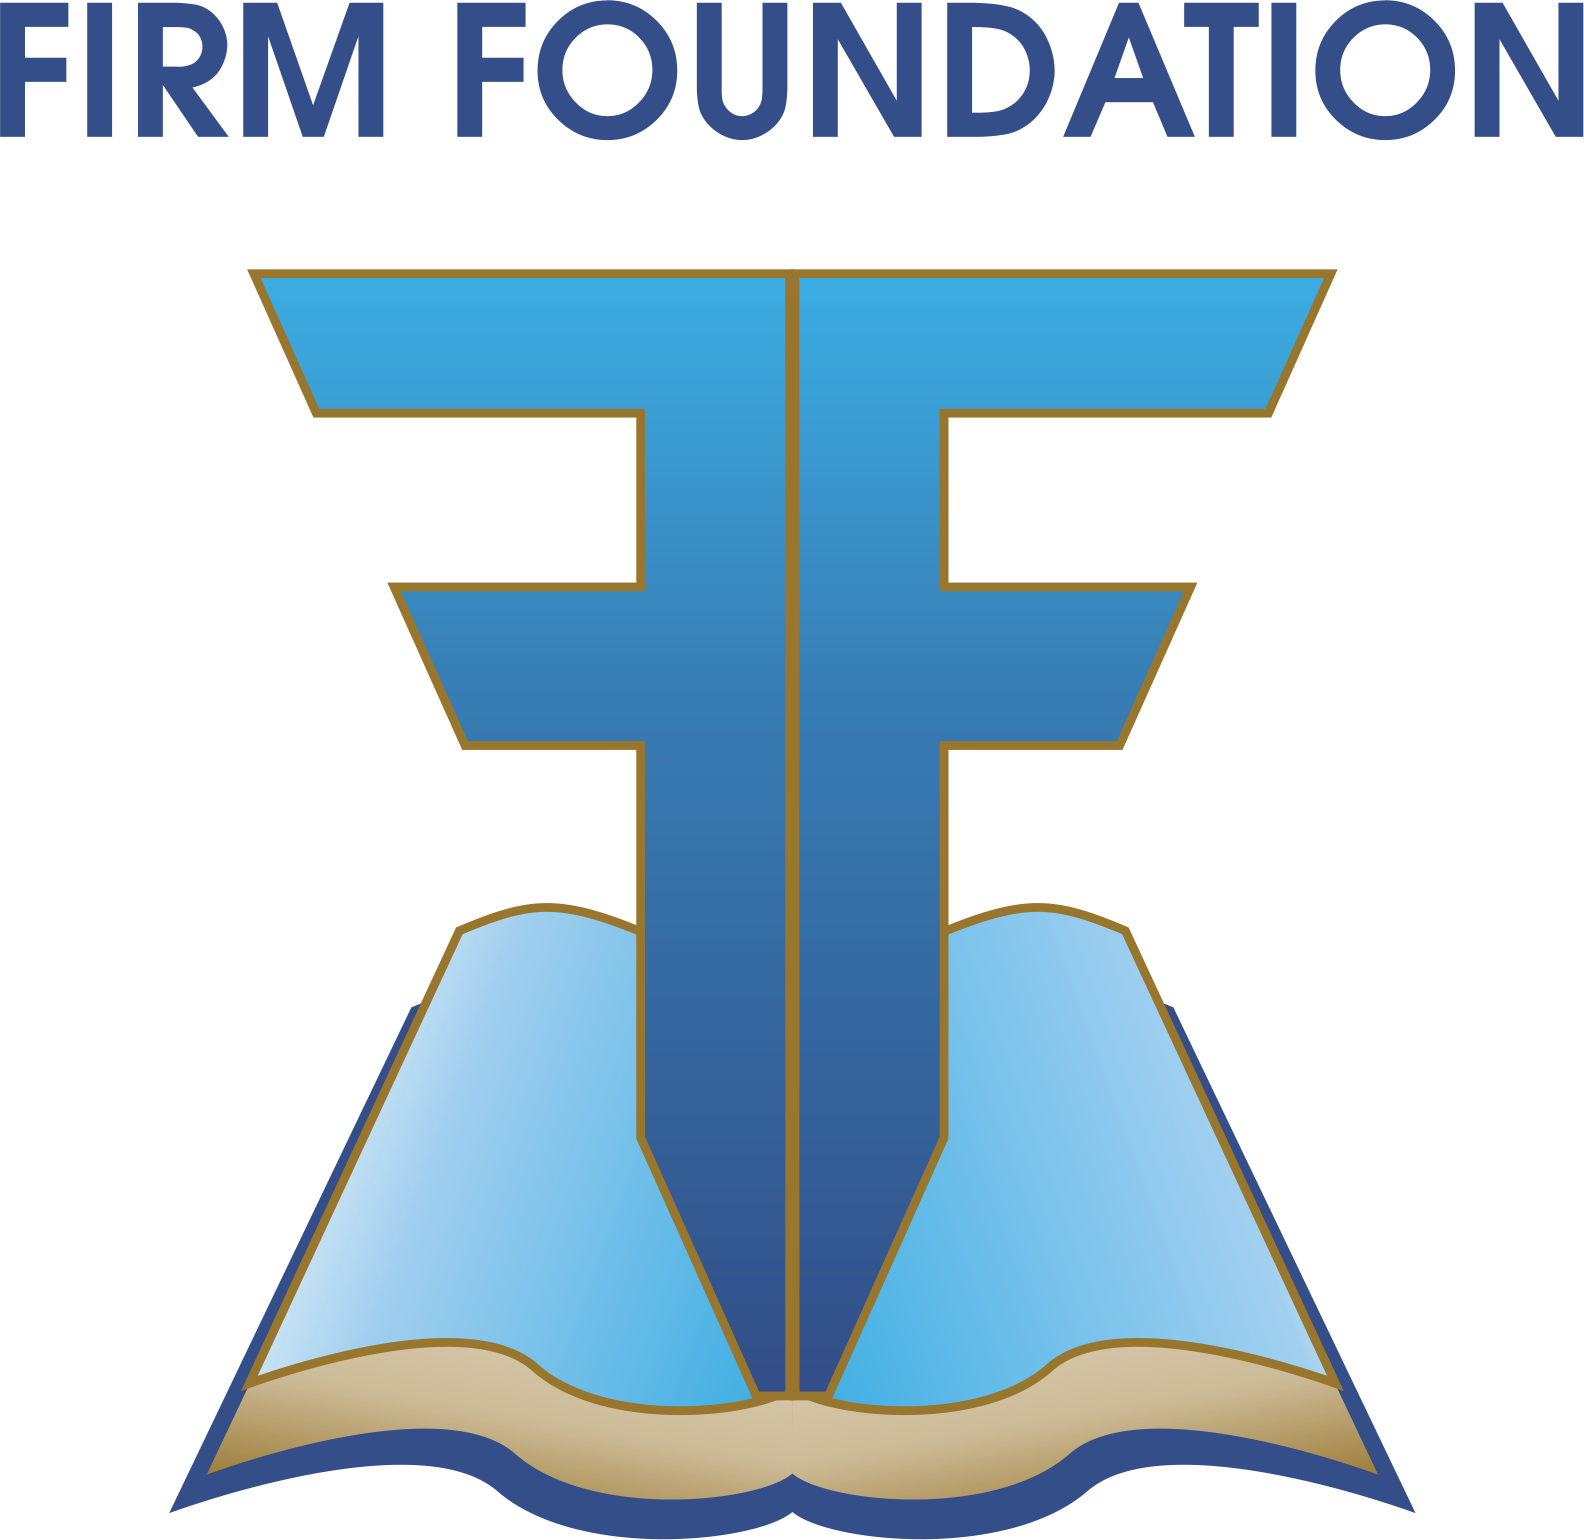 We Are A Non-denominational Ministry Located In Kernersville, - Firm Foundation (1584x1540)